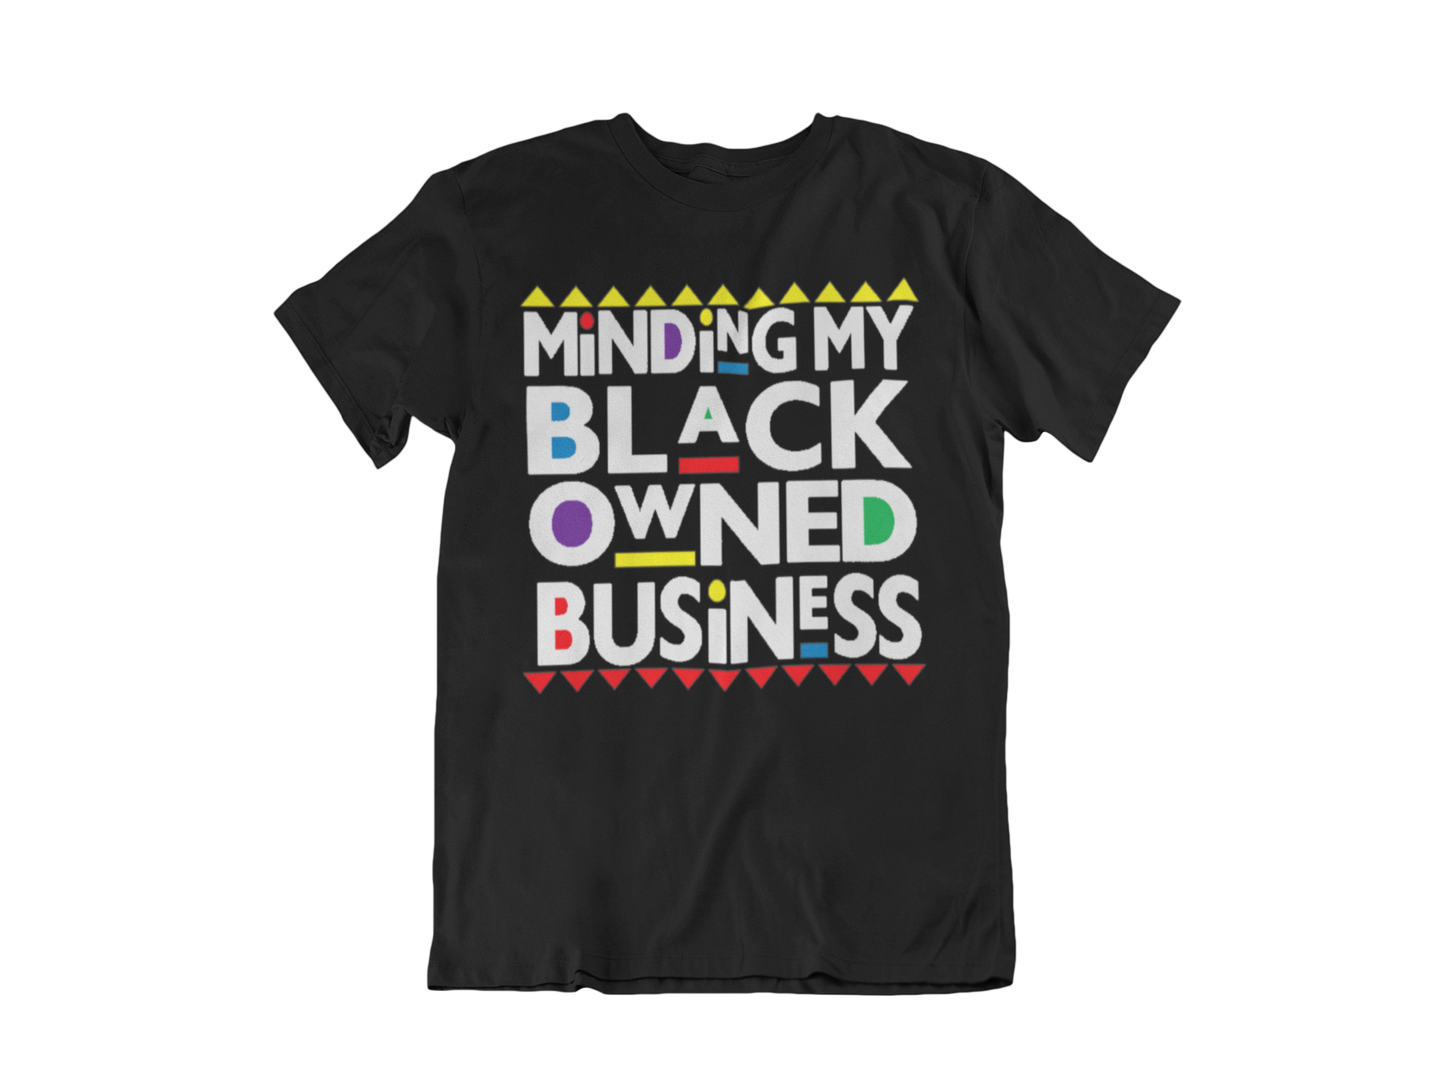 MINDING MY BLACK OWNED BUSINESS TEE